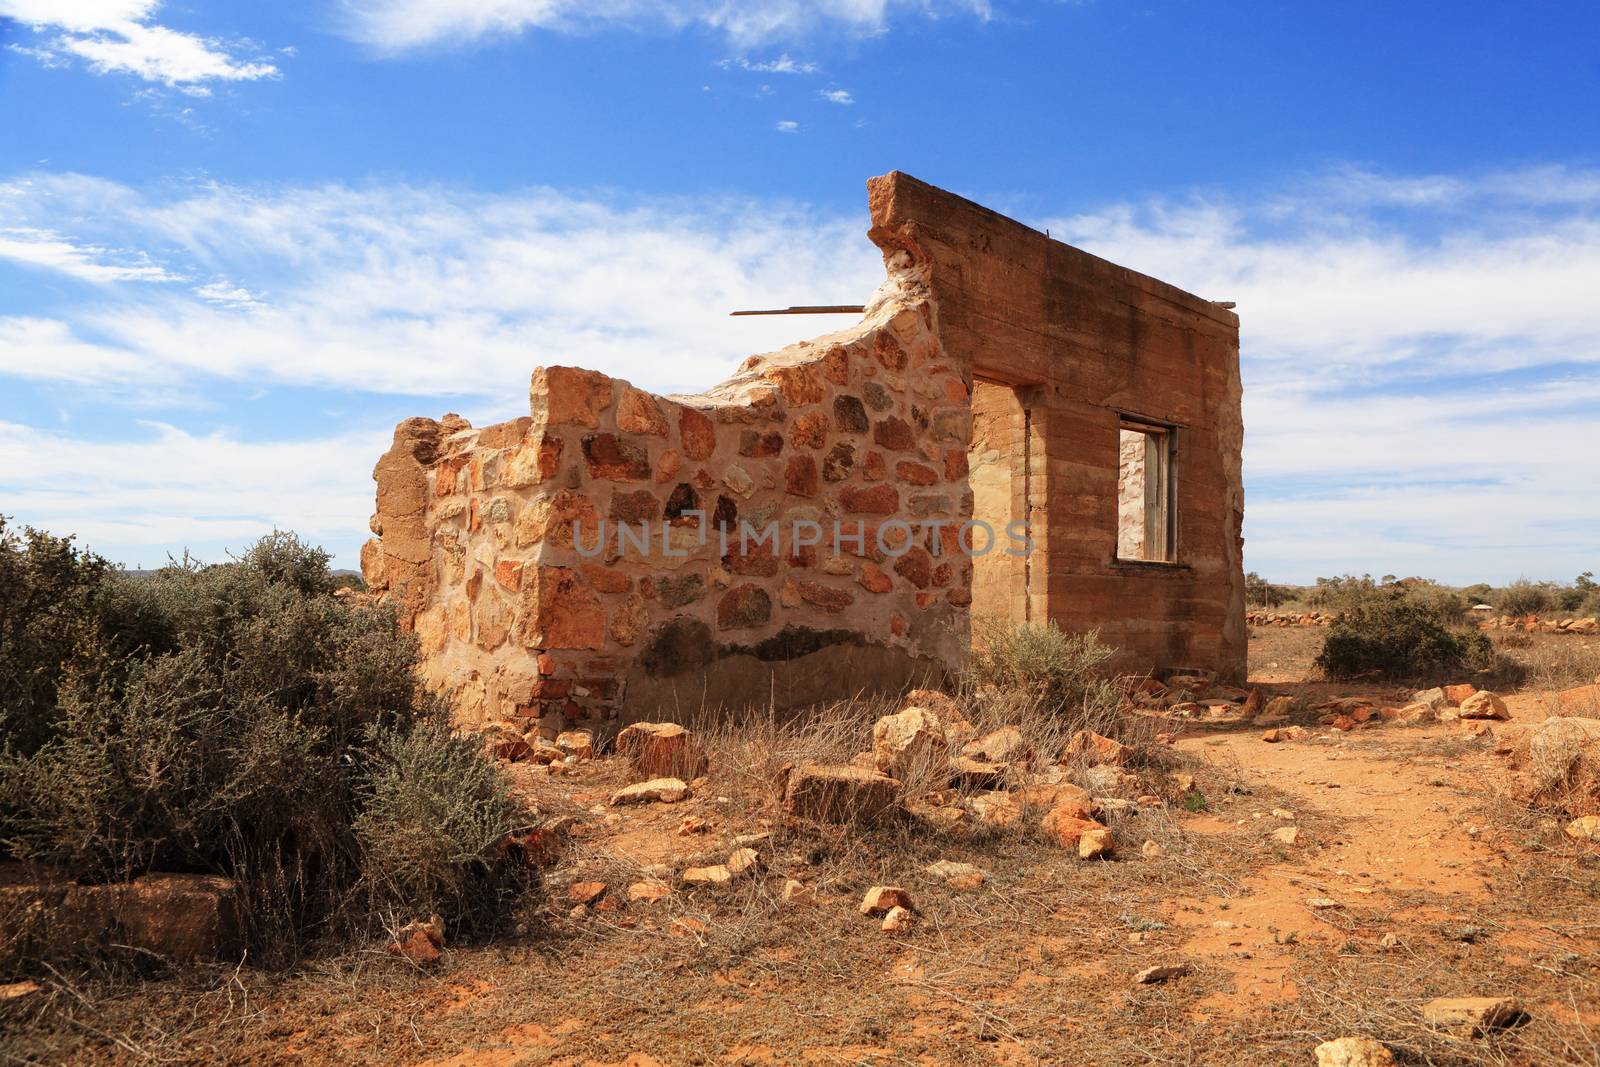 Desolation stone house ruins in the desert by lovleah